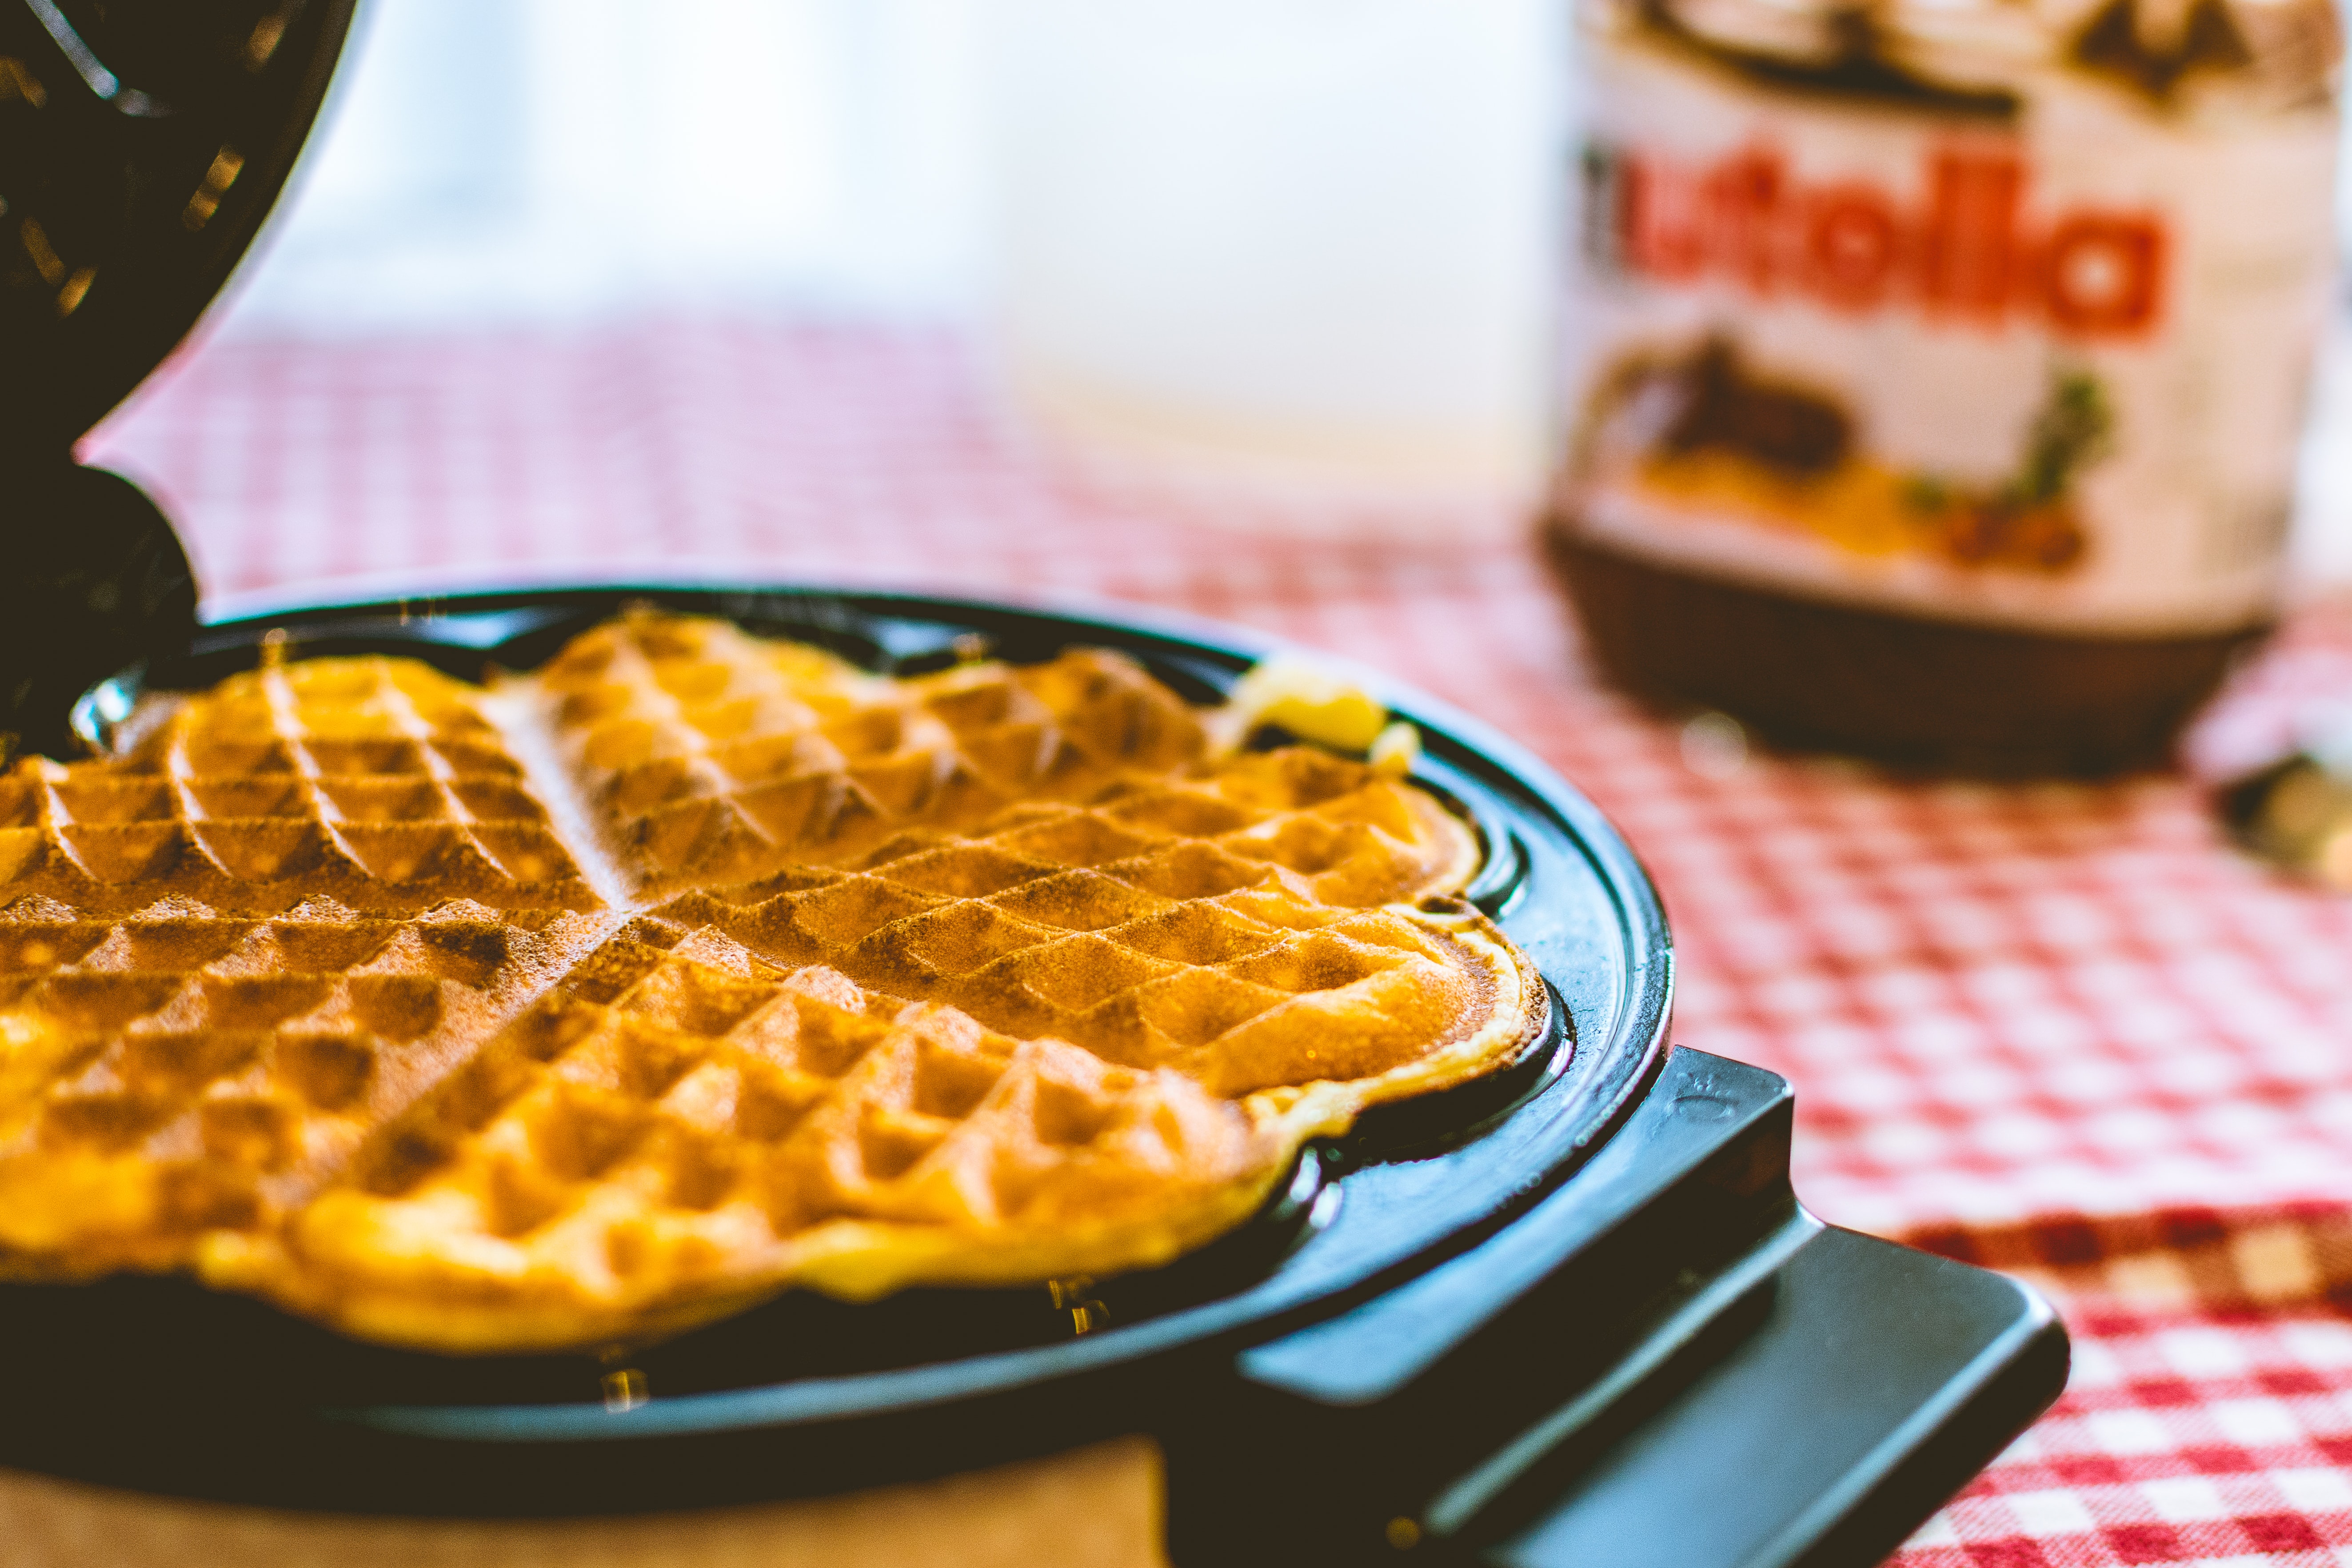 How to Clean A Waffle Iron's featured image